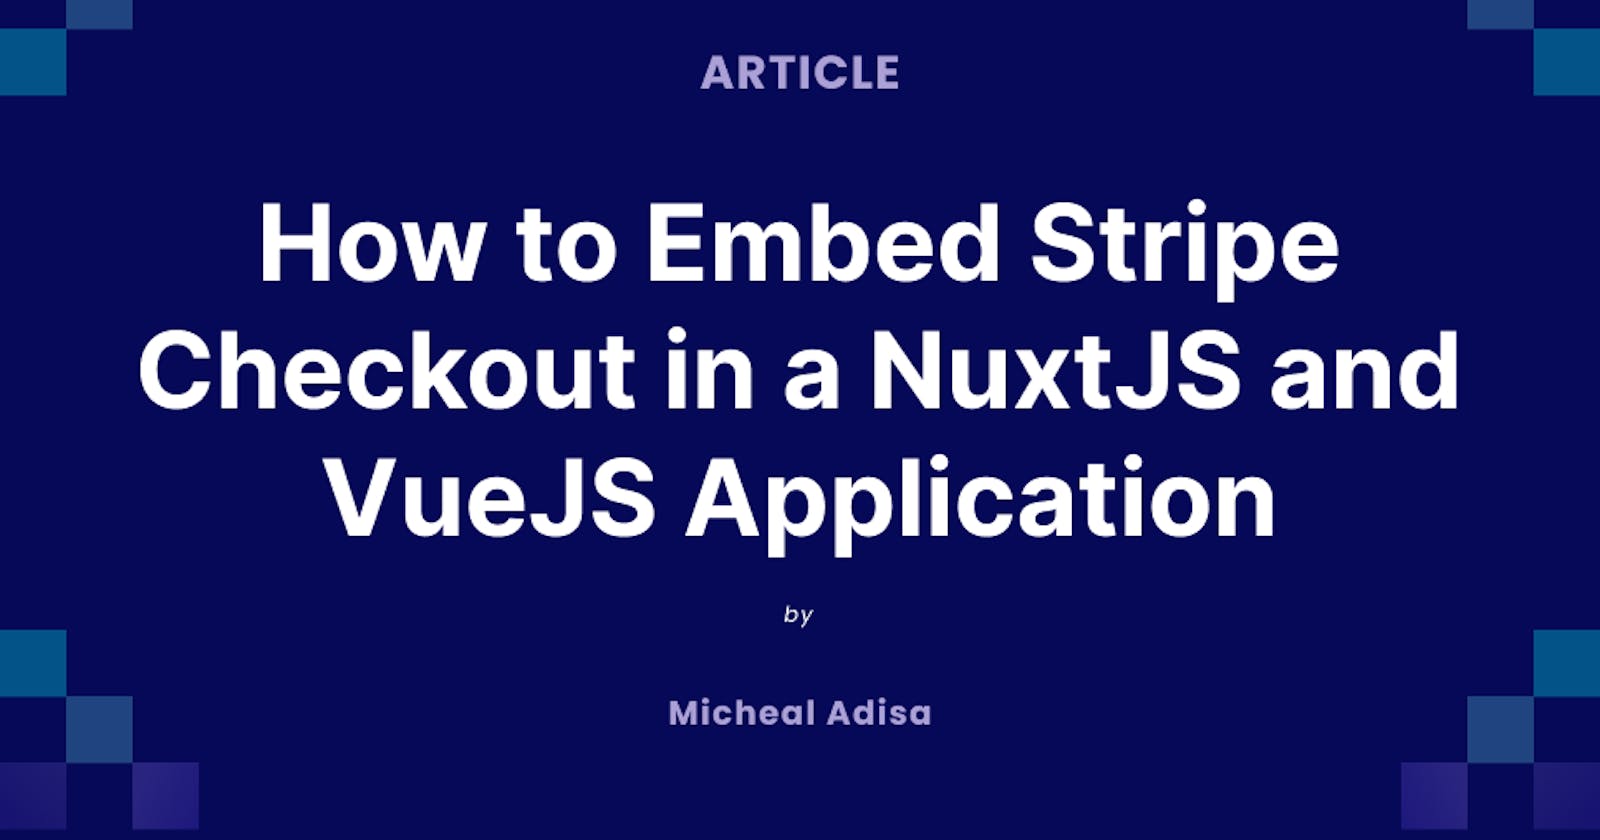 How to Embed Stripe Checkout in a NuxtJS and VueJS Application